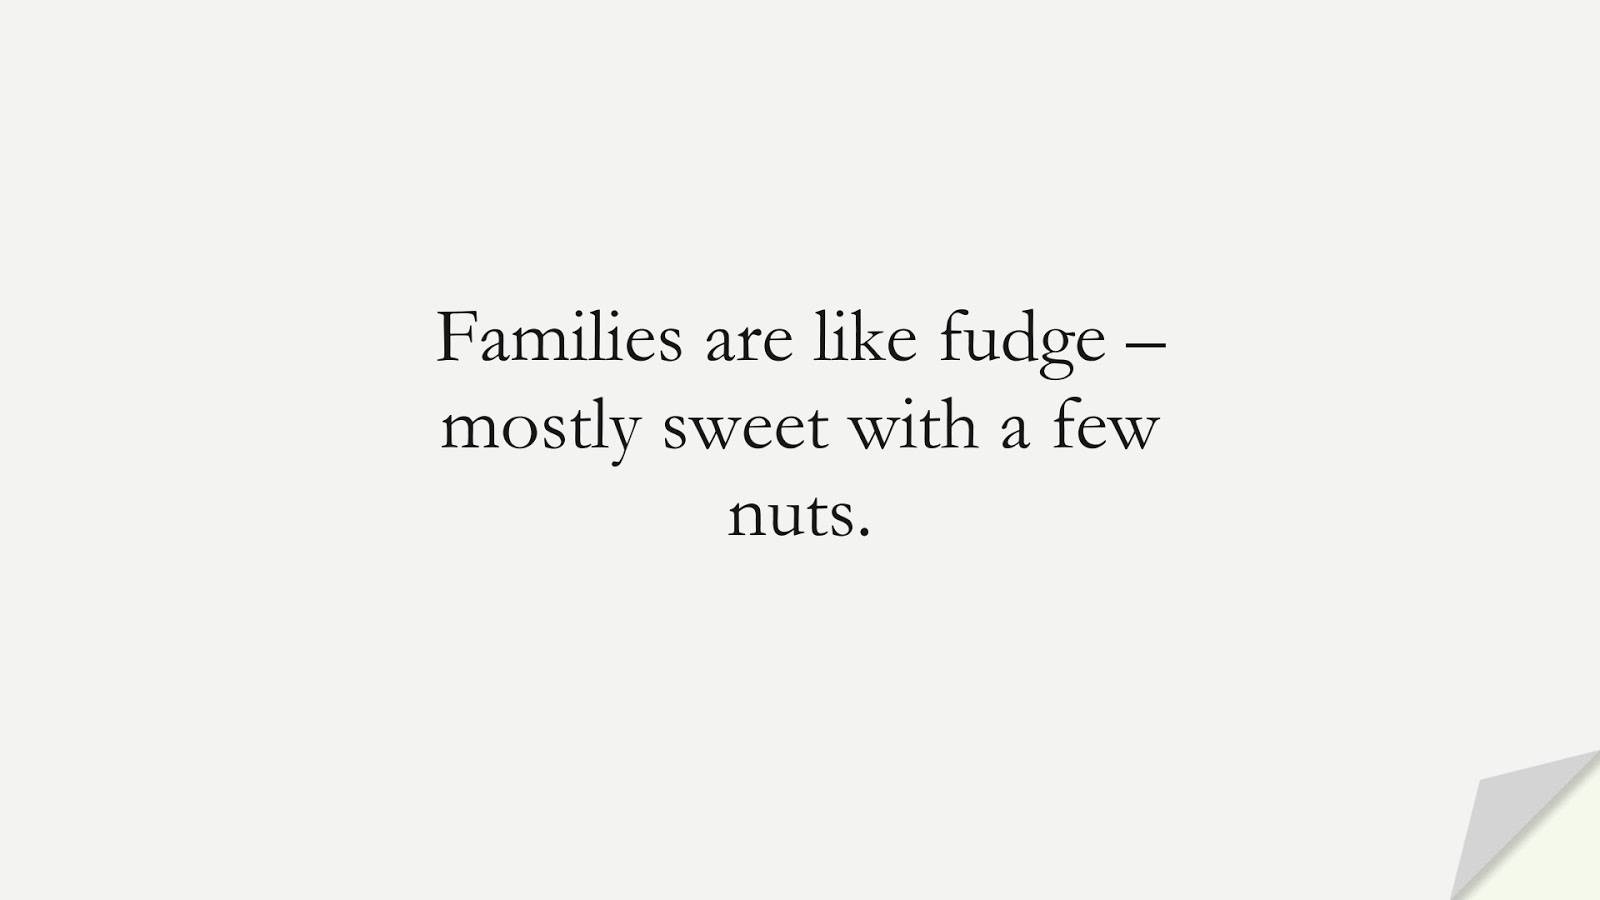 Families are like fudge – mostly sweet with a few nuts.FALSE